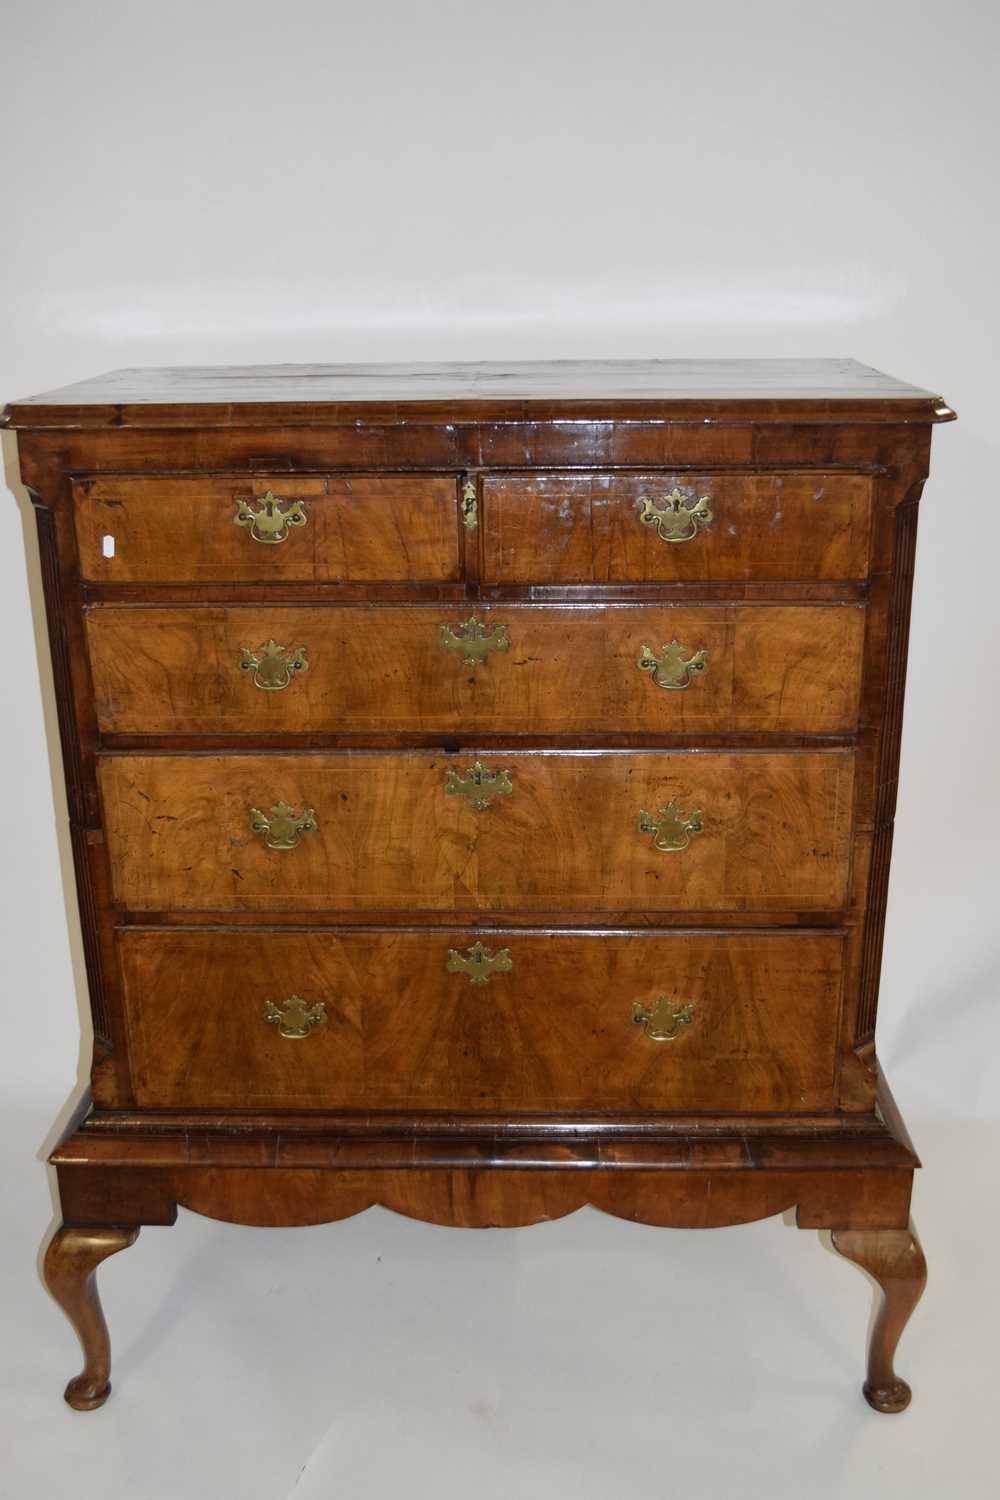 18th century and later walnut chest on stand, the piece has been significantly modified with the top